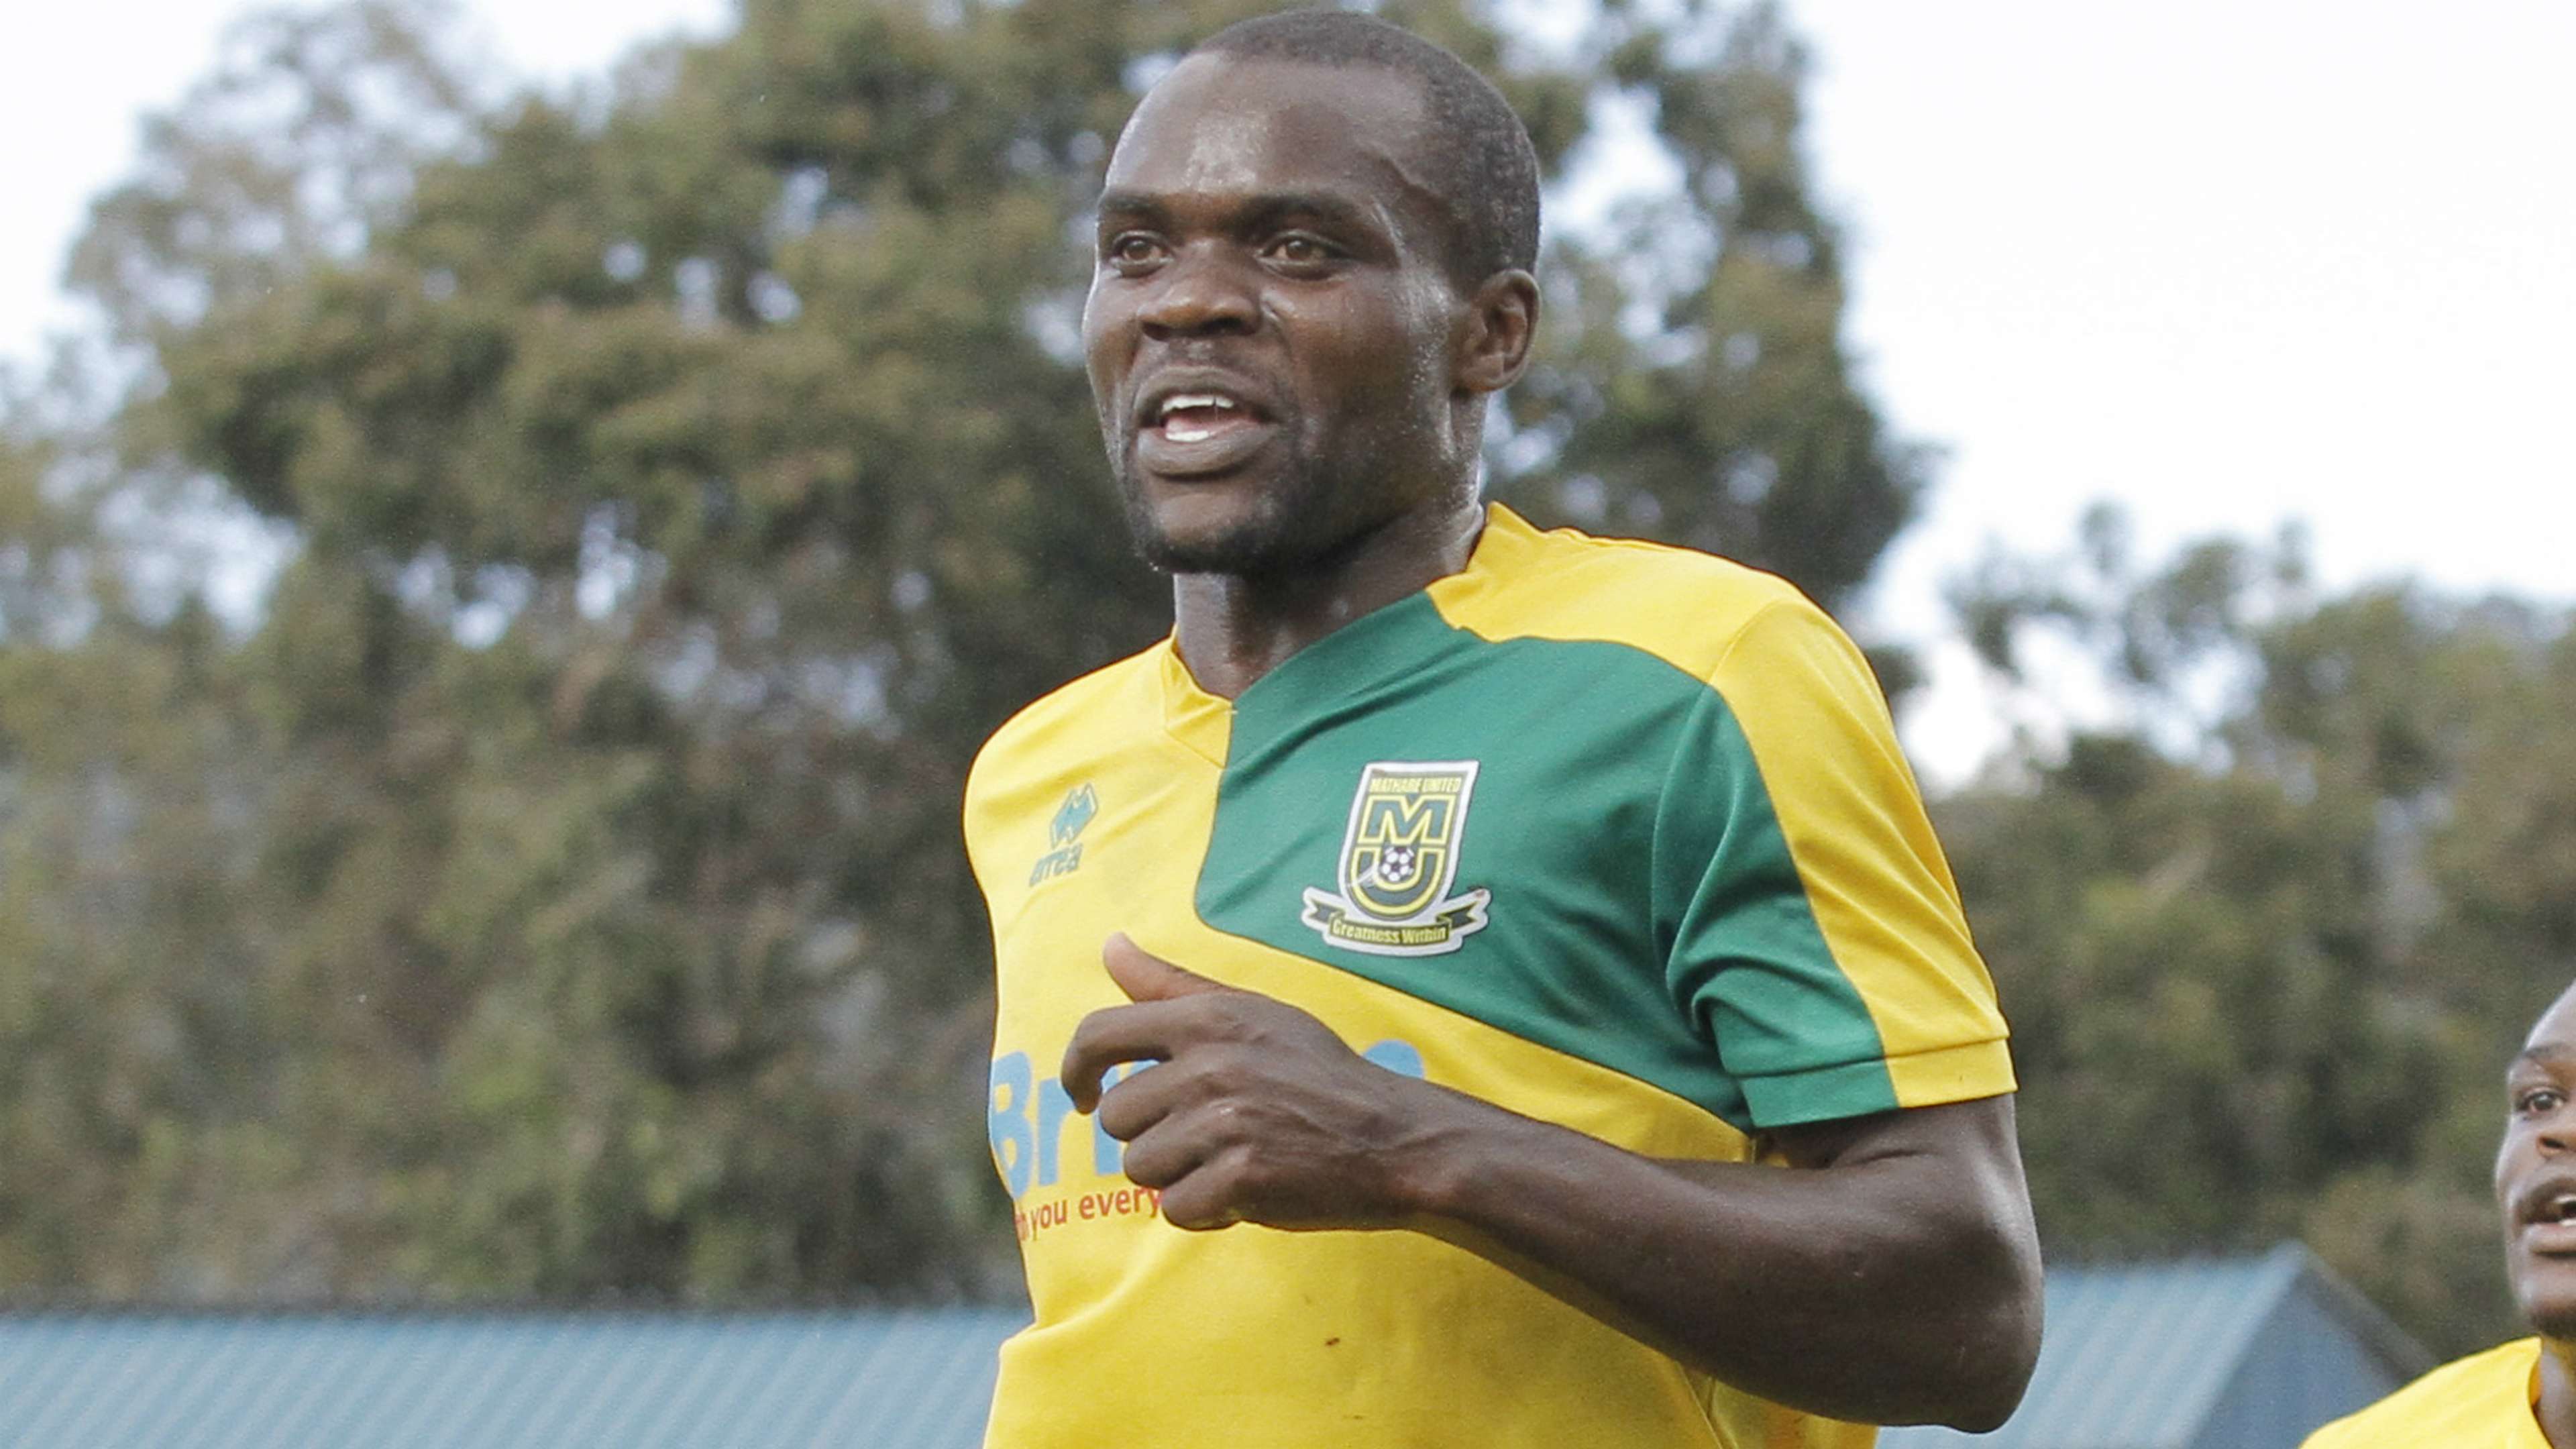 Chrisphine Oduor of Mathare United.